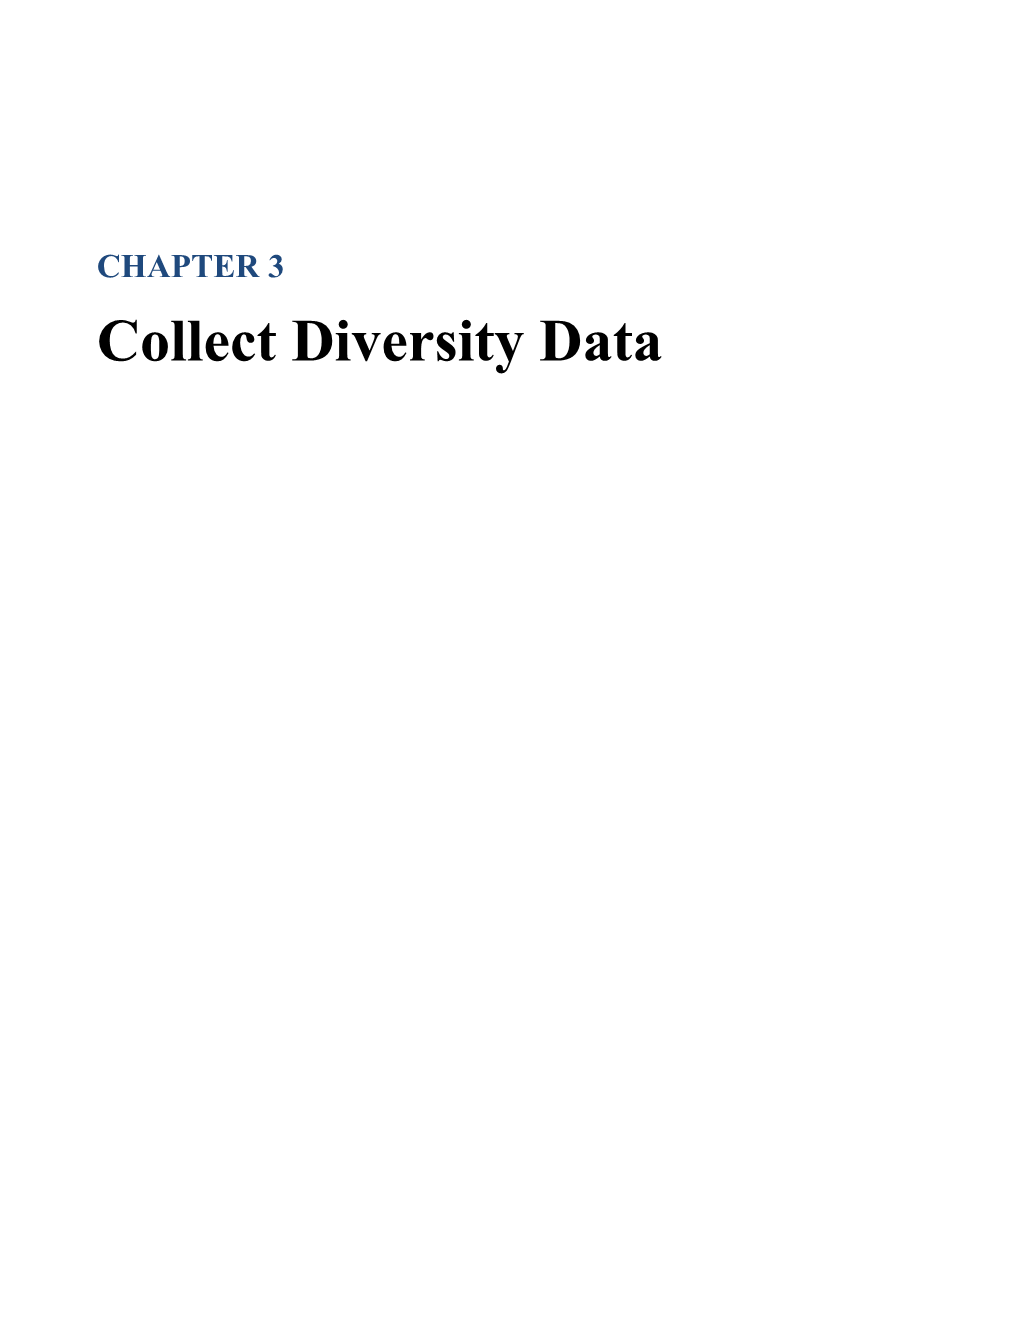 Collect Diversity Data